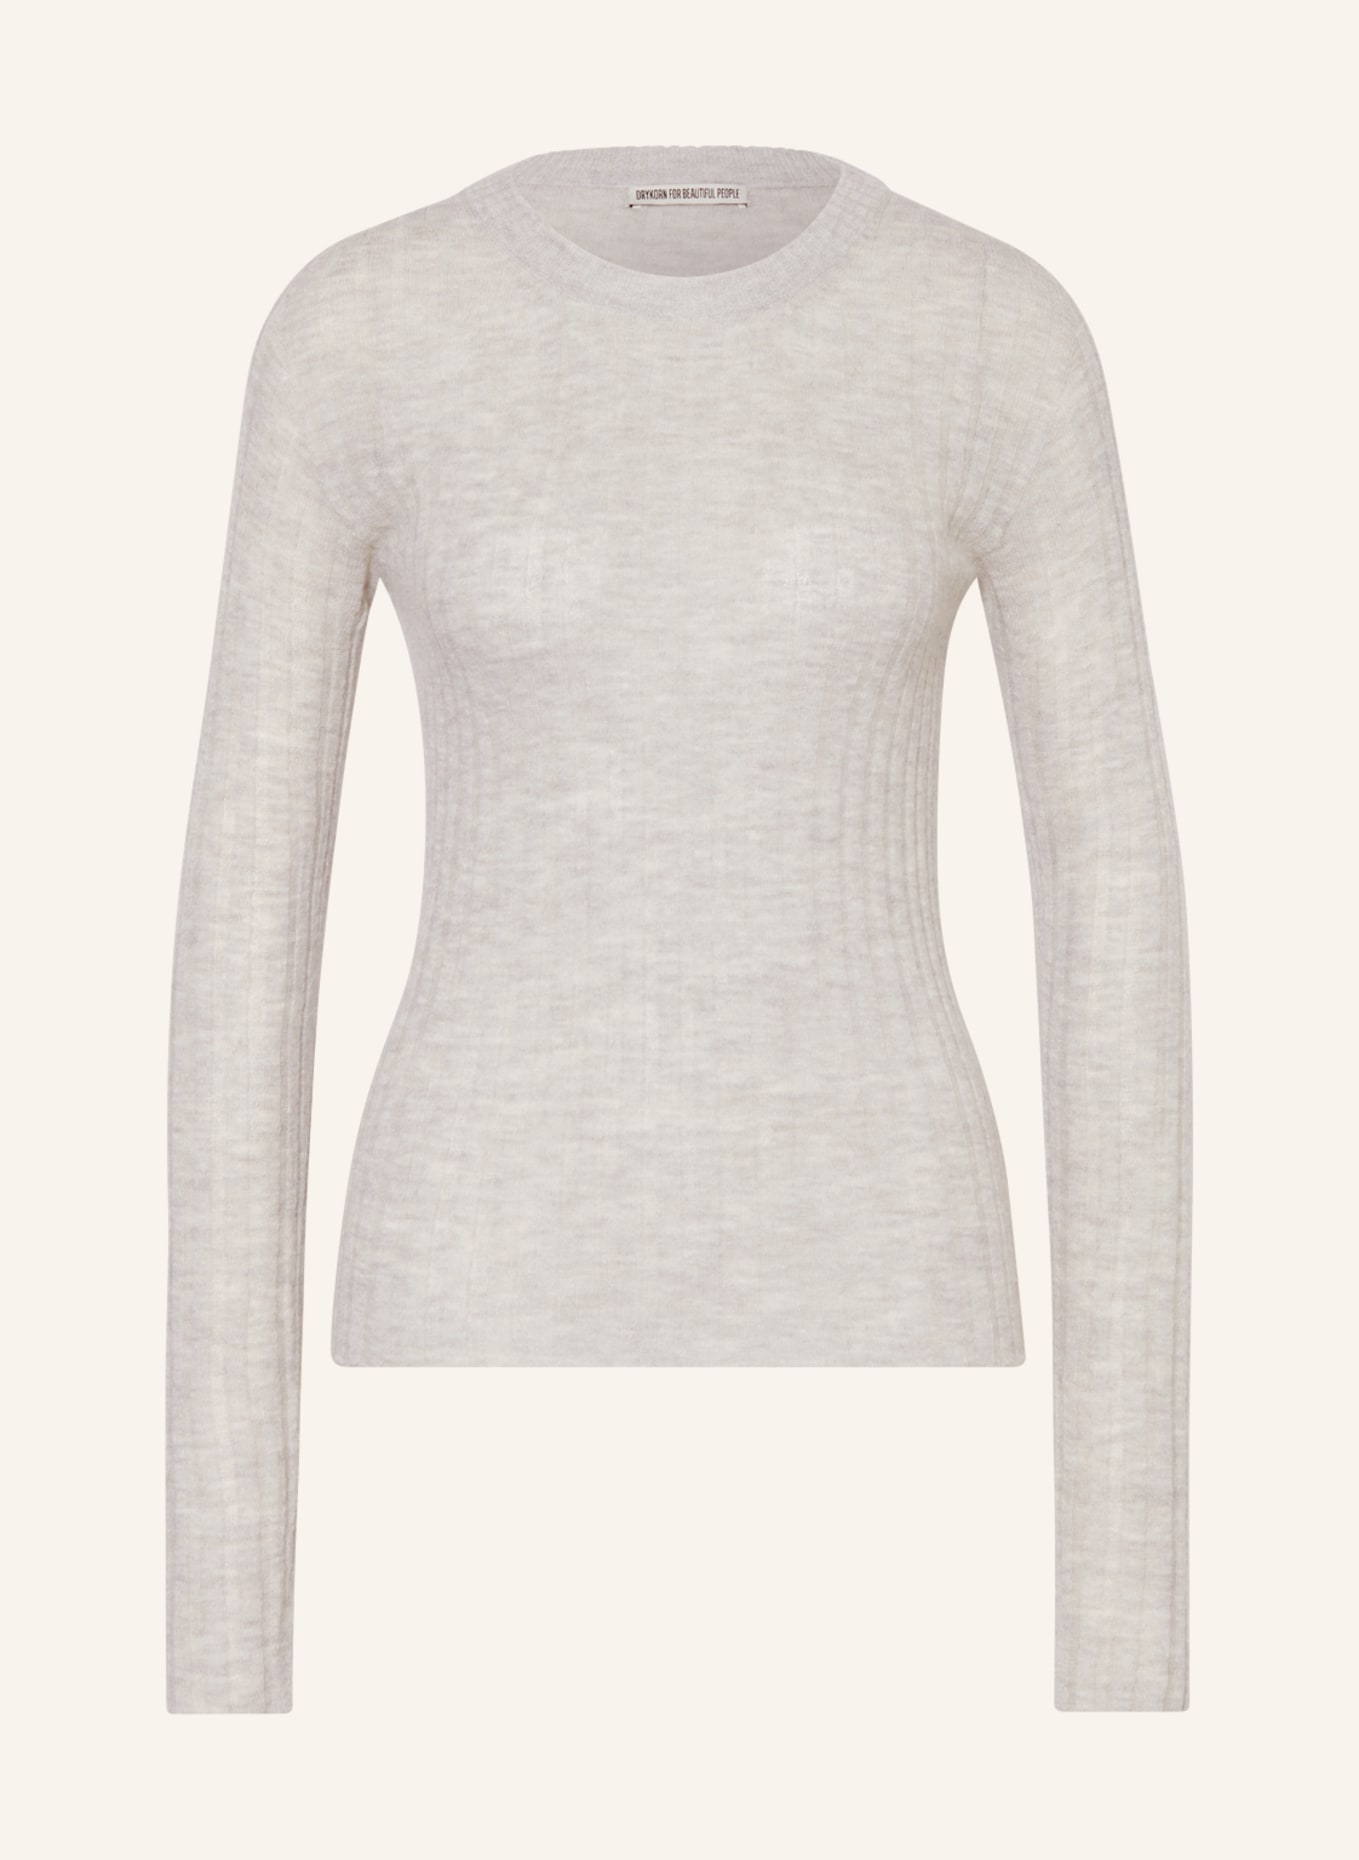 DRYKORN Sweater ERMA with alpaca, Color: LIGHT GRAY (Image 1)